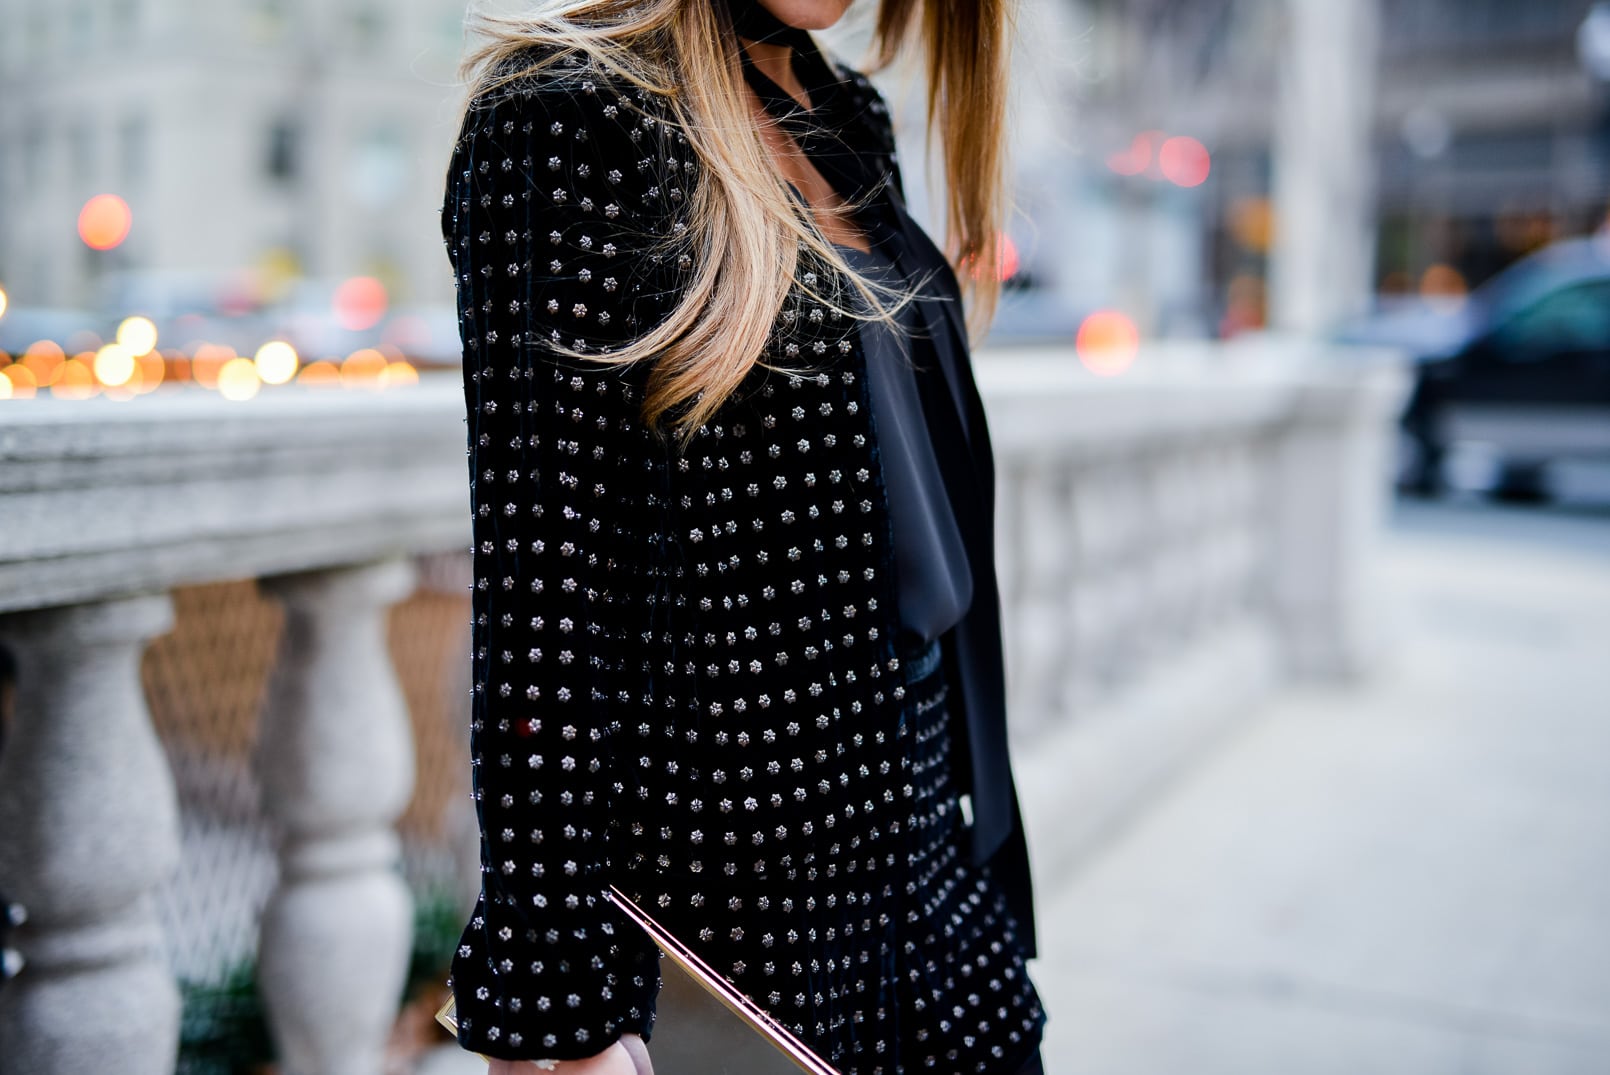 Pam Hetlinger wearing a Topshop Holiday Party Outfit, Velvet studded shorts, velvet studded blazer, skinny scarf and Delman over the knee boots